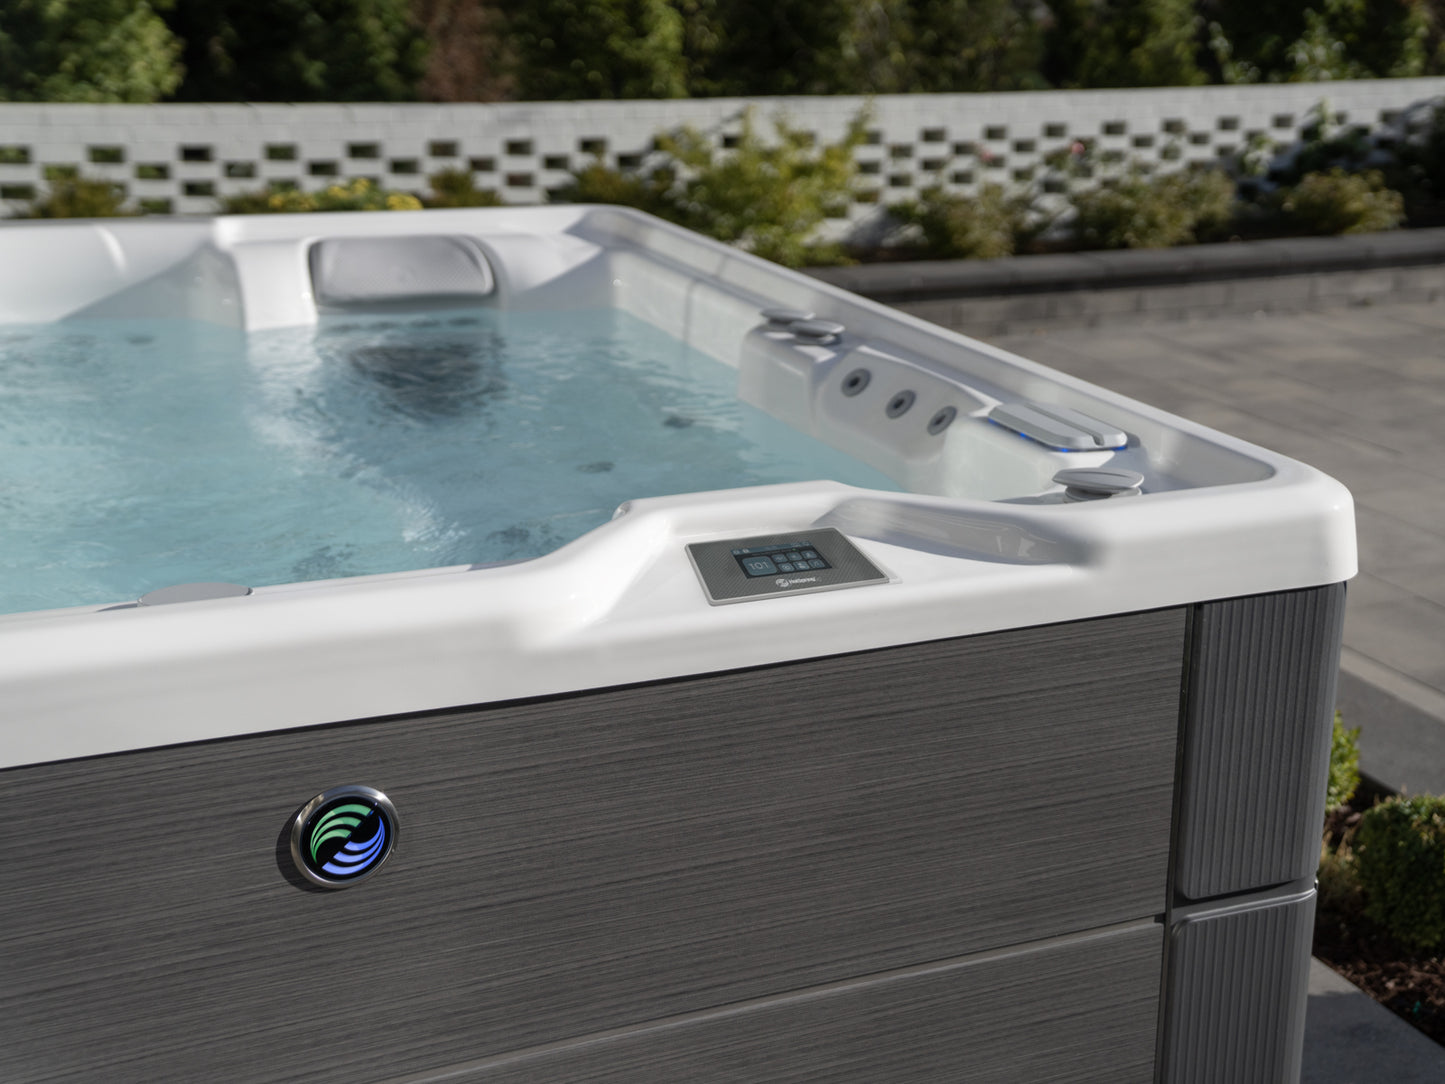 Envoy Spa Hot Tub, Highlife Collection, 5 Seats, Lounge Feature